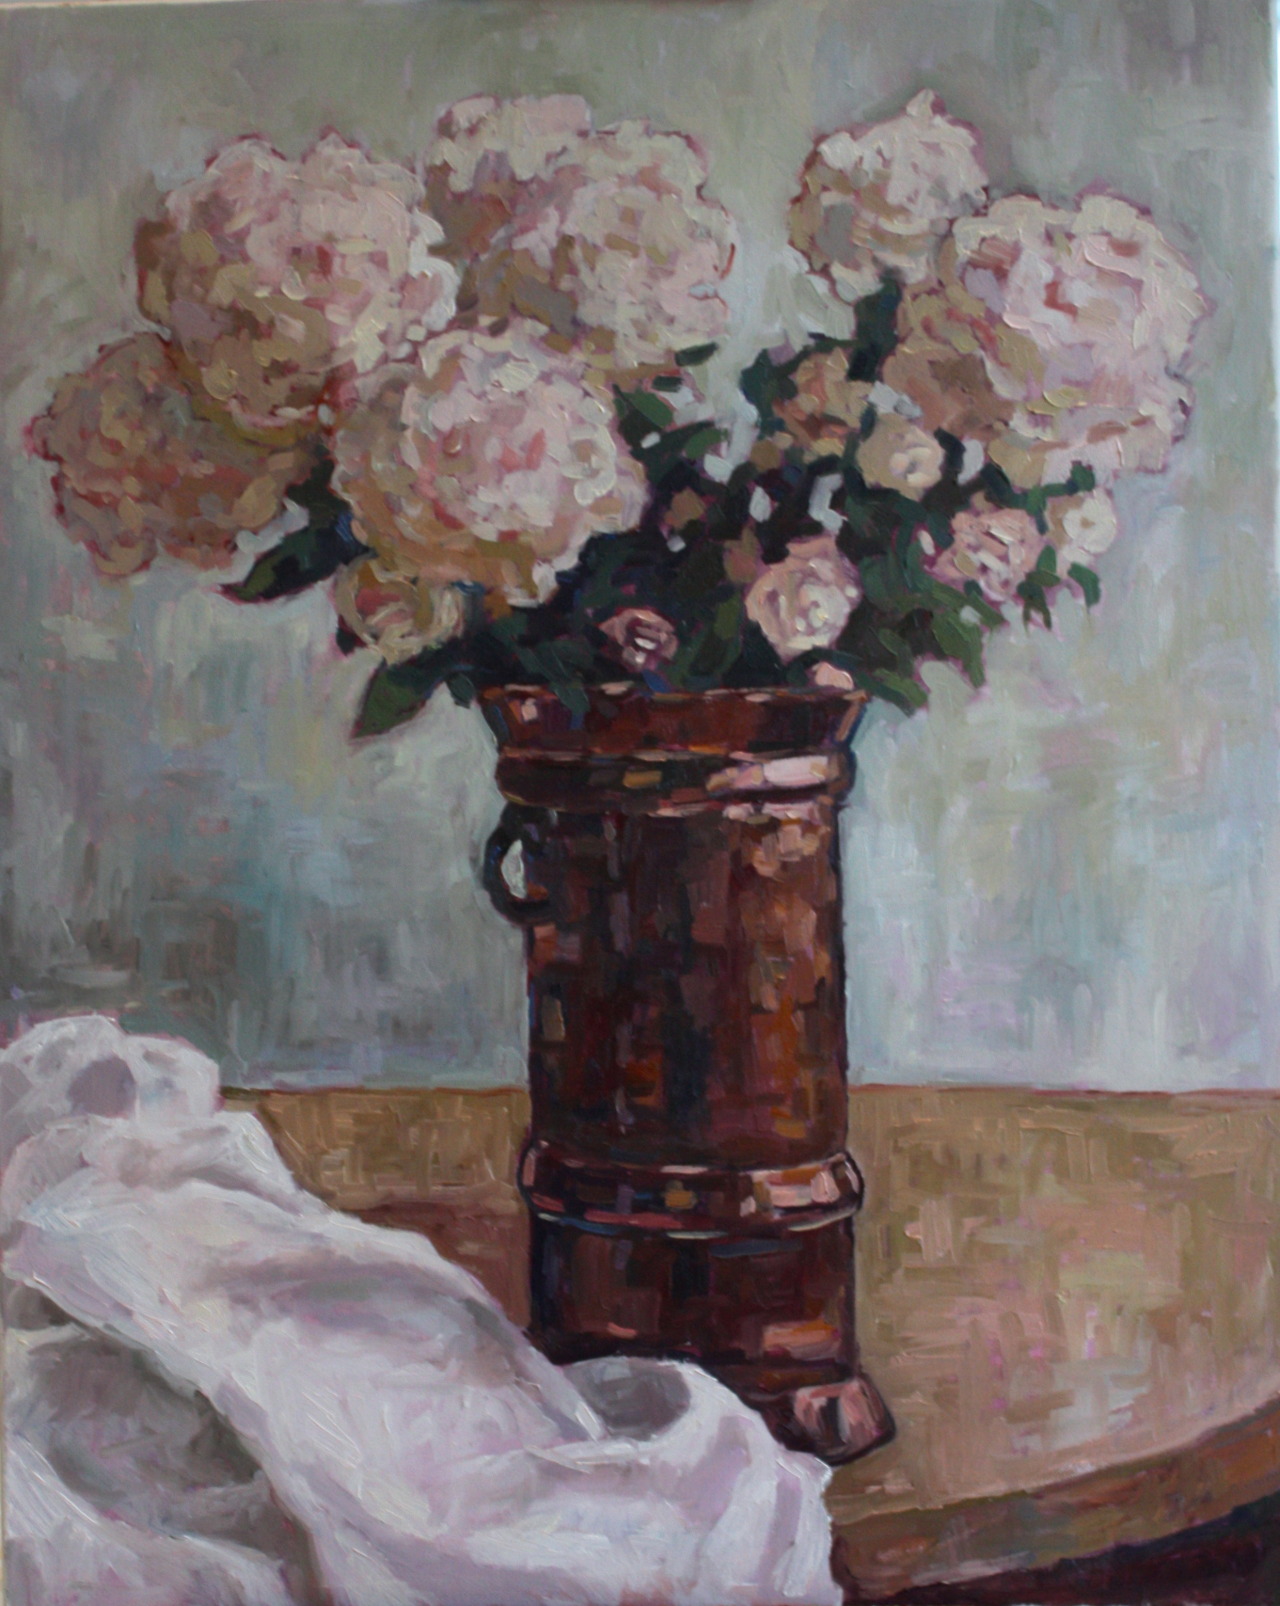 White Peonies - oil on canvas. Follow Kate on Tumblr or Like her page on Facebook!